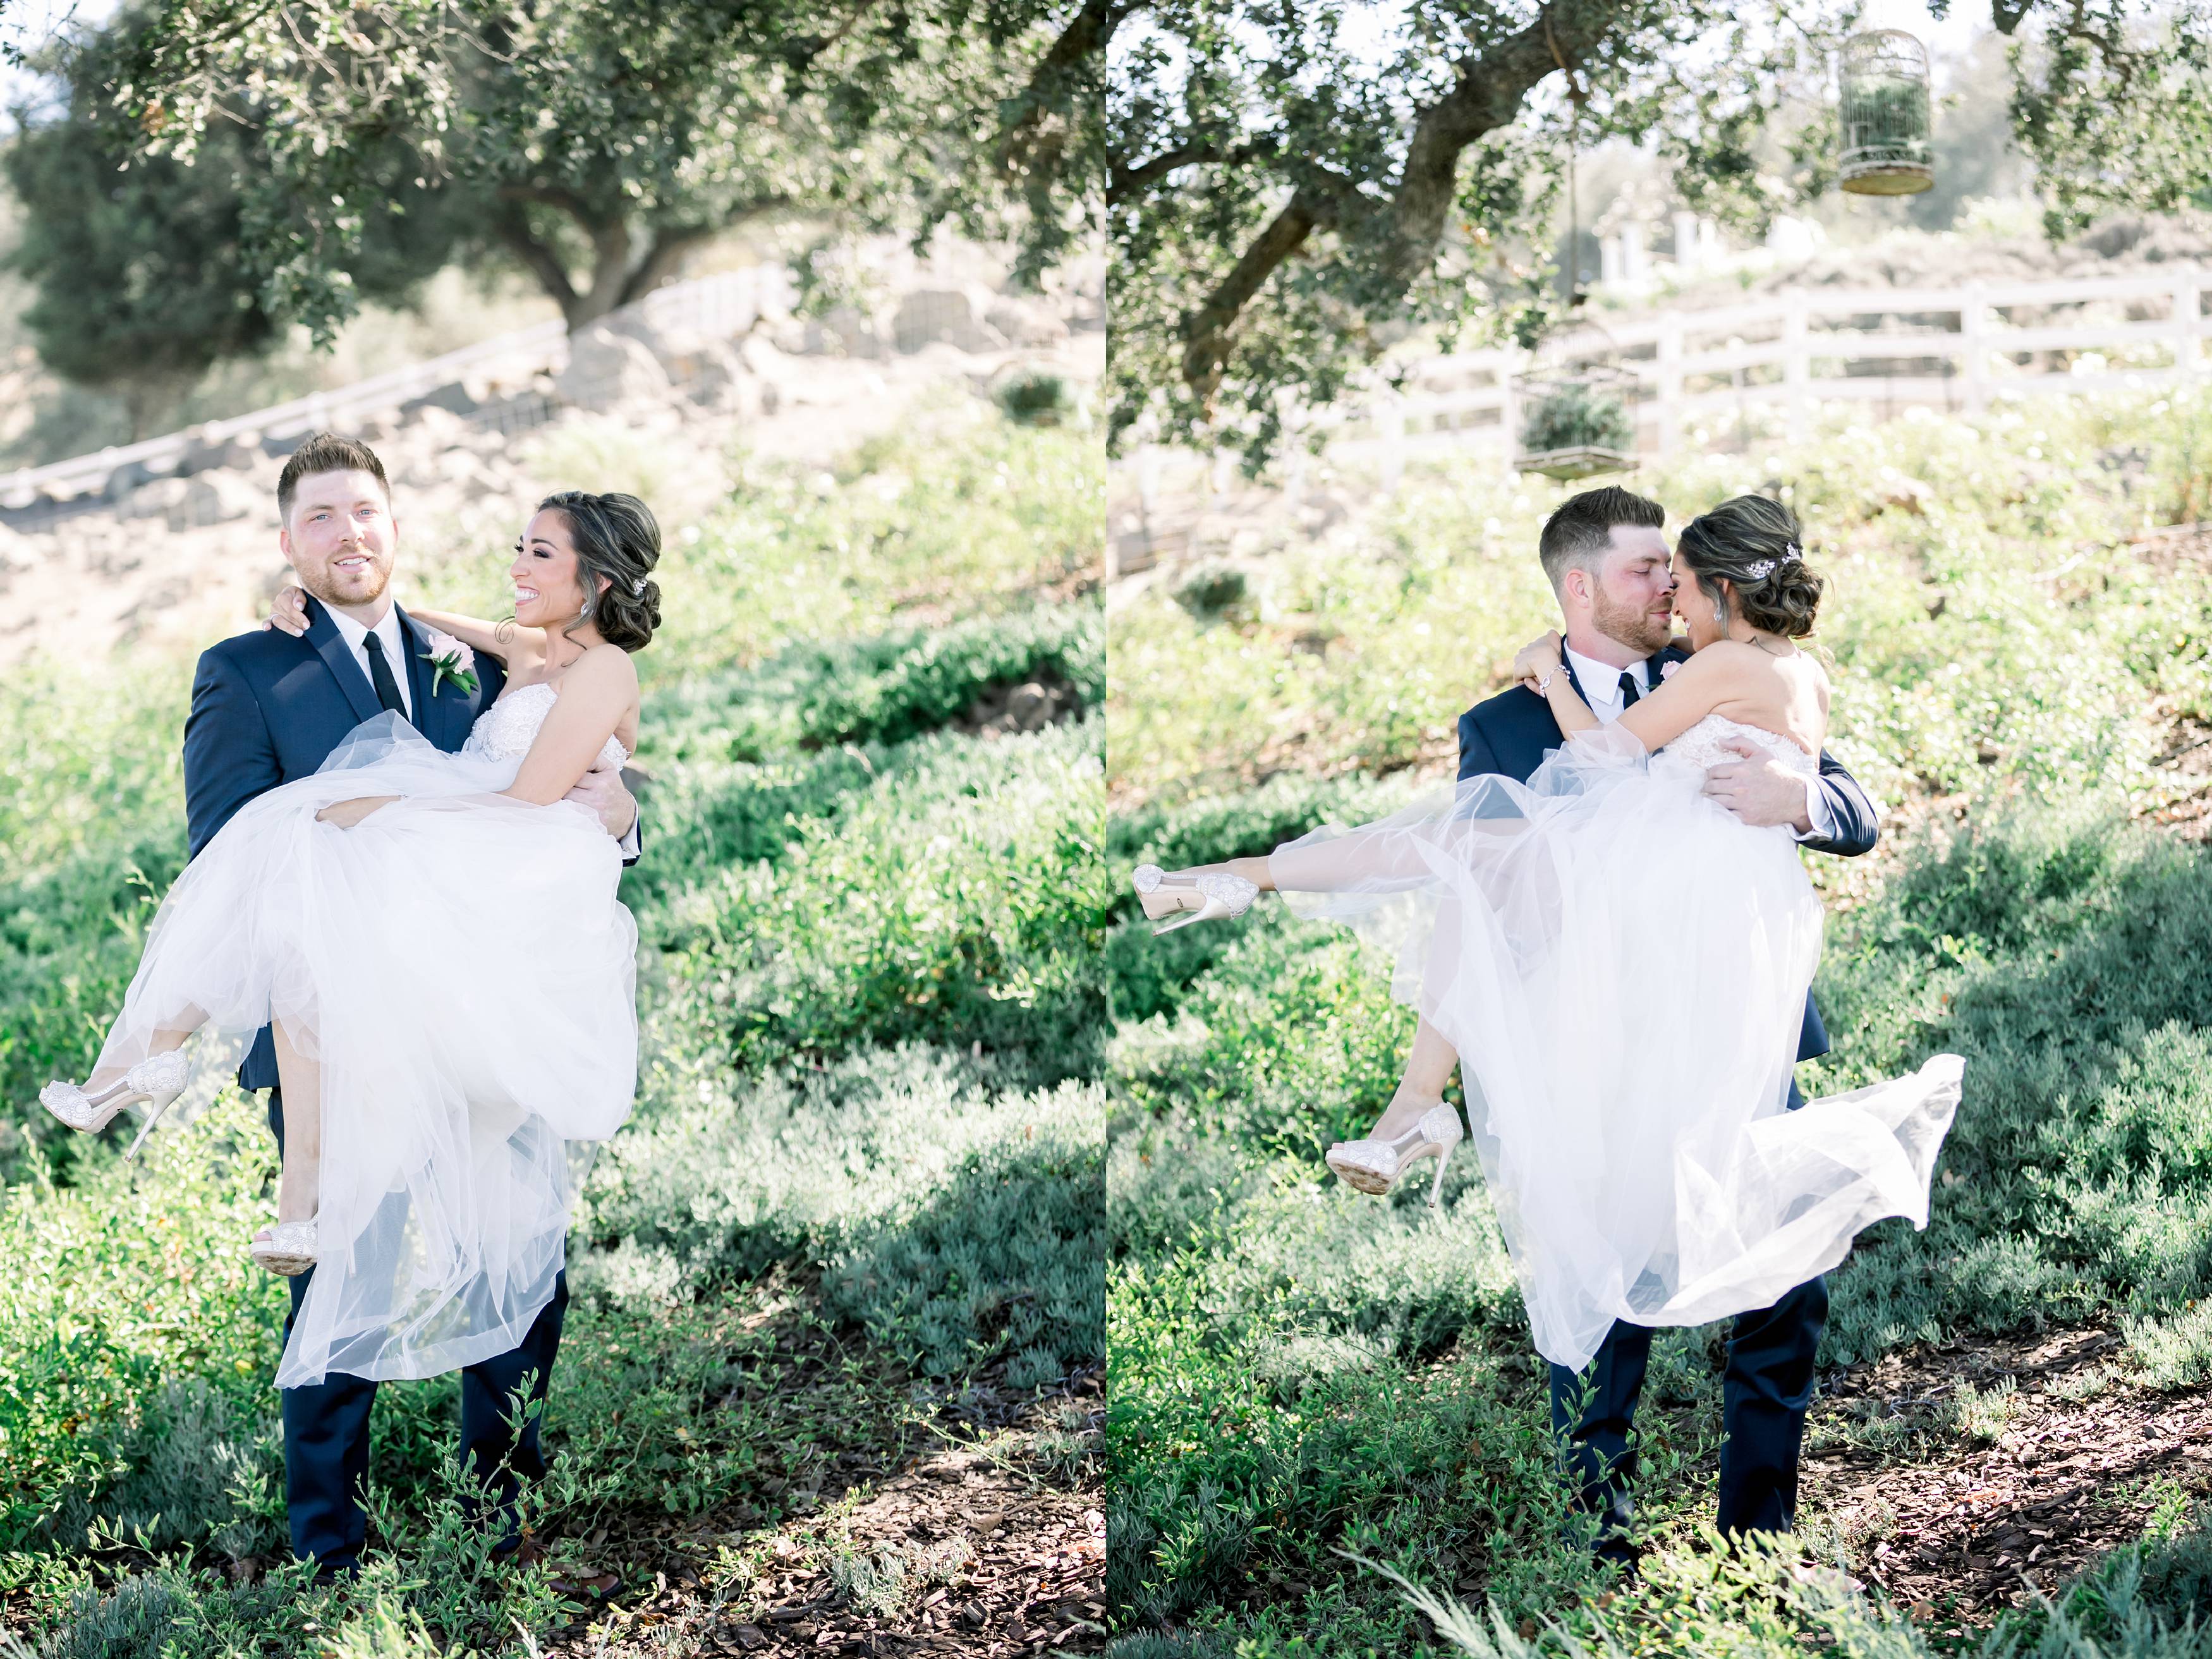 Bride picks up groom in wedding photos at Forever and Always Farm wedding venue in Temecula California